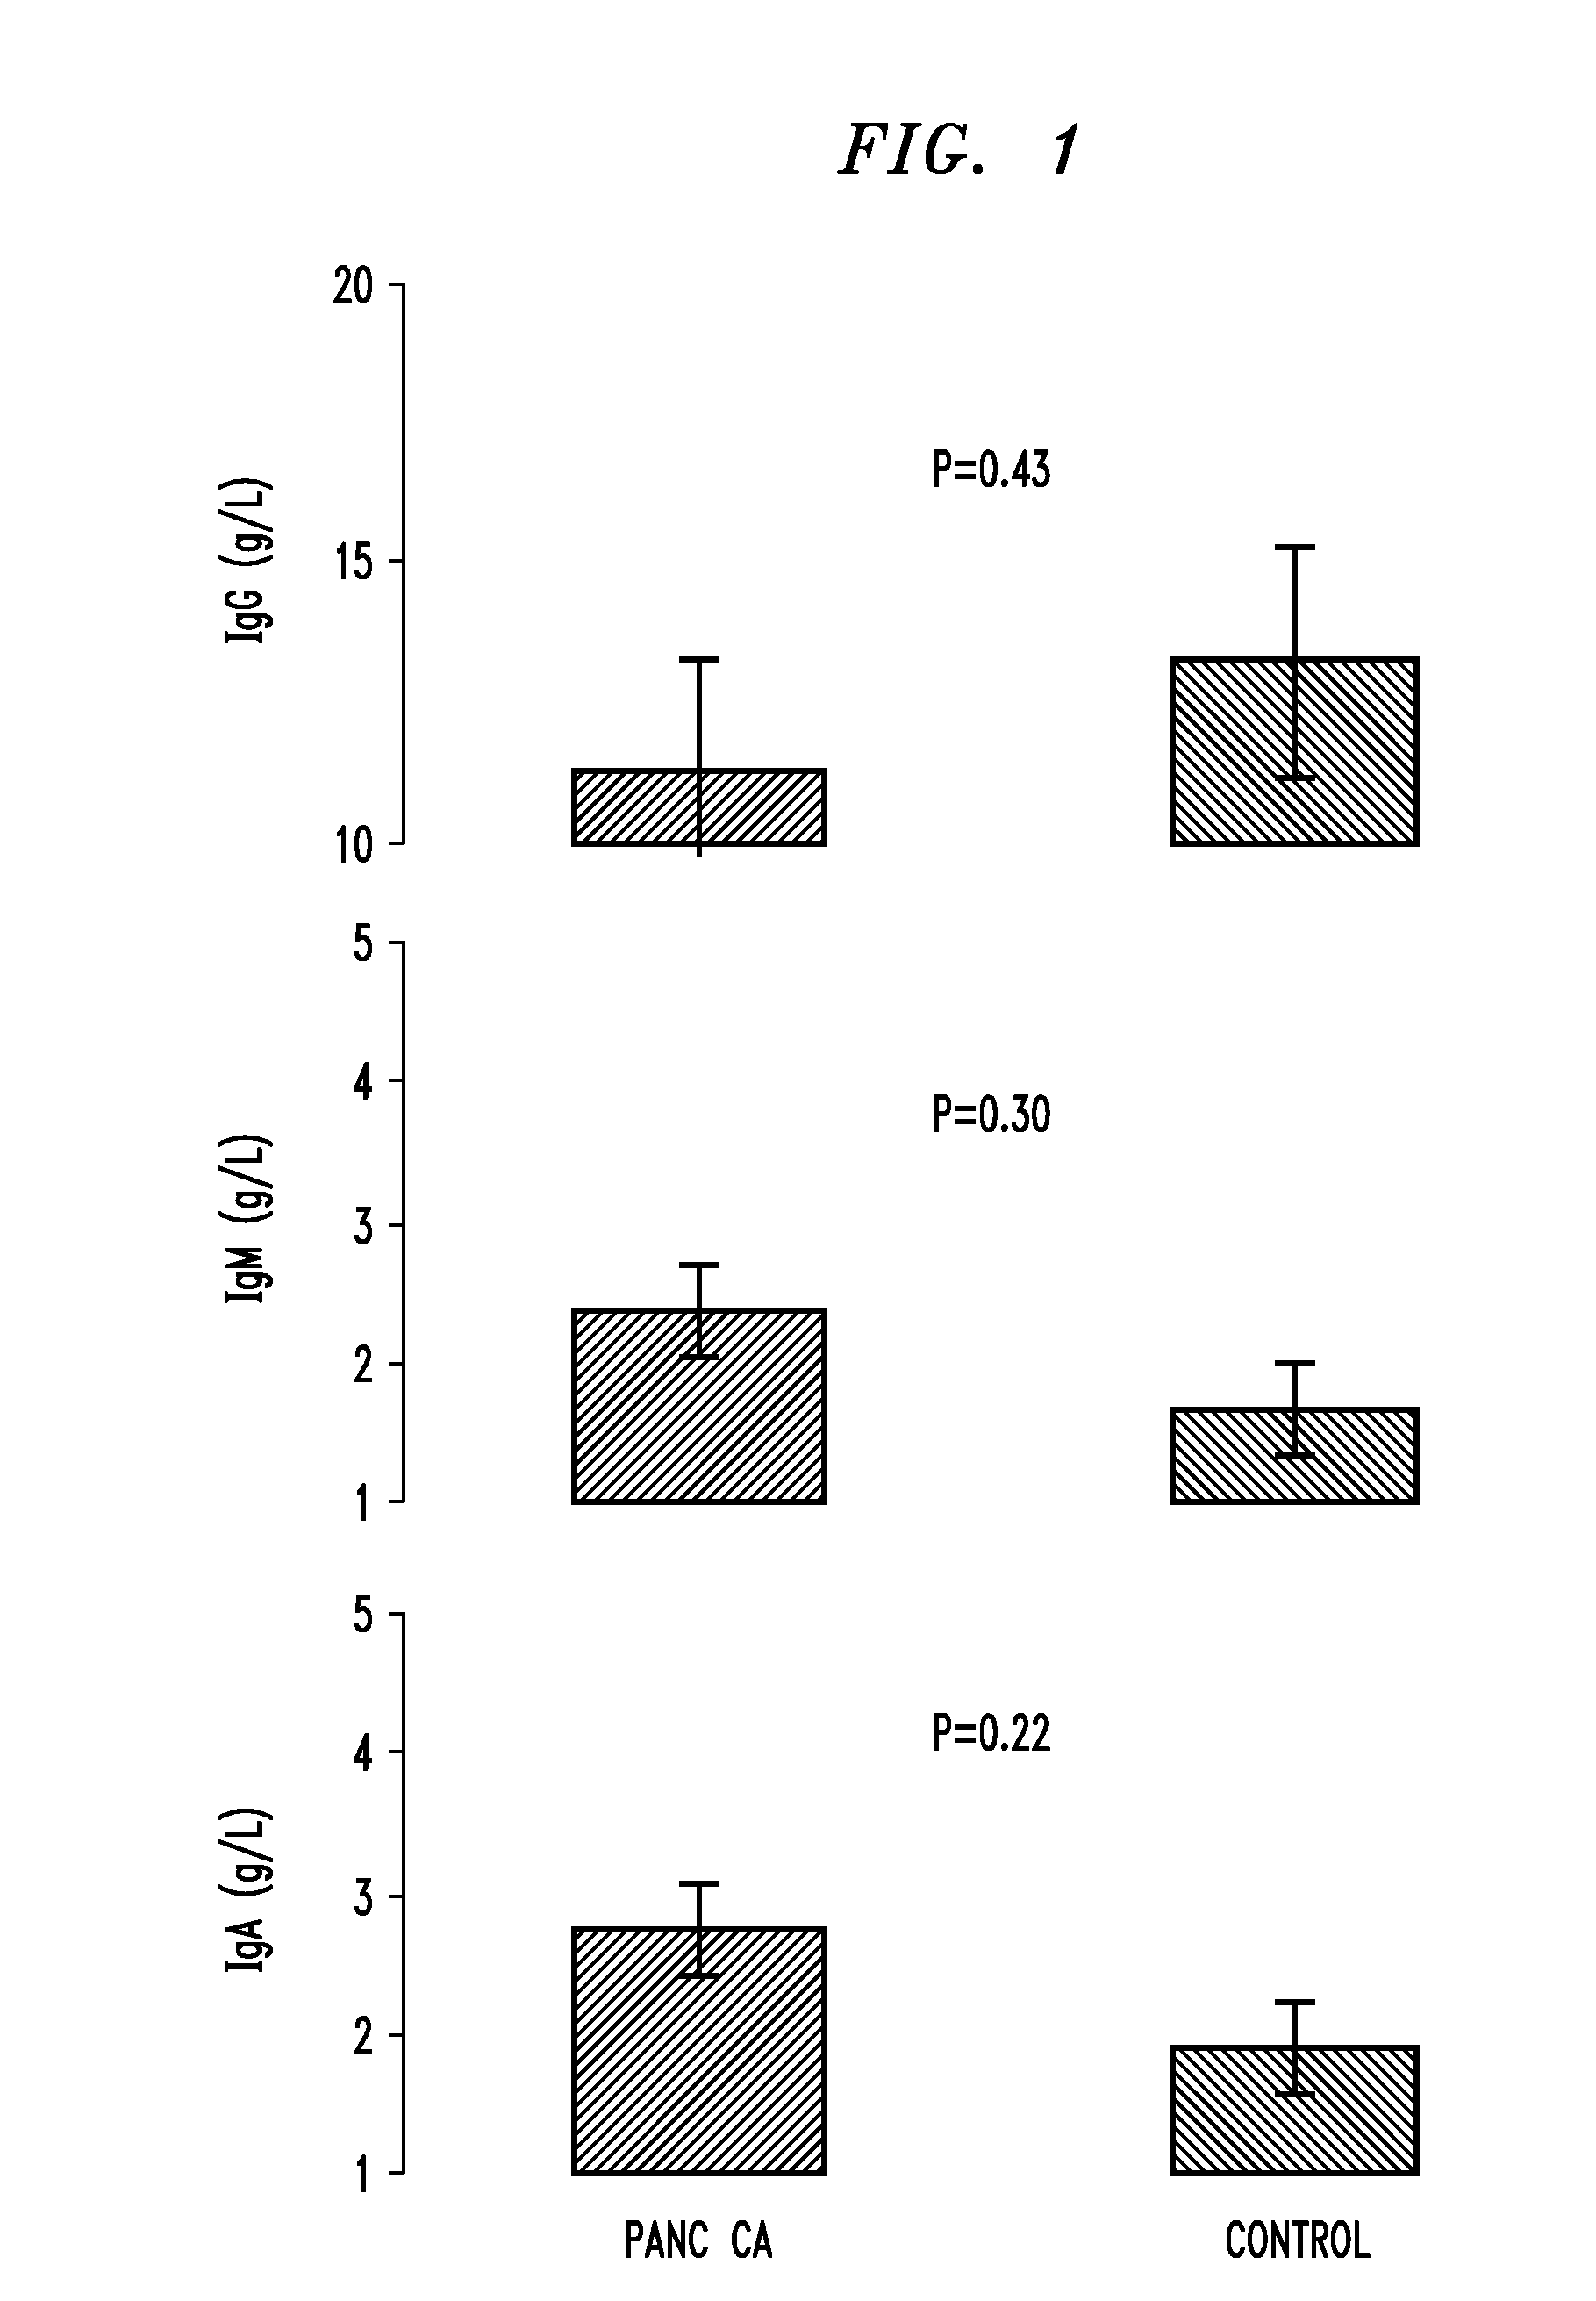 Method for Diagnosis and Treatment of Pancreatic Cancer